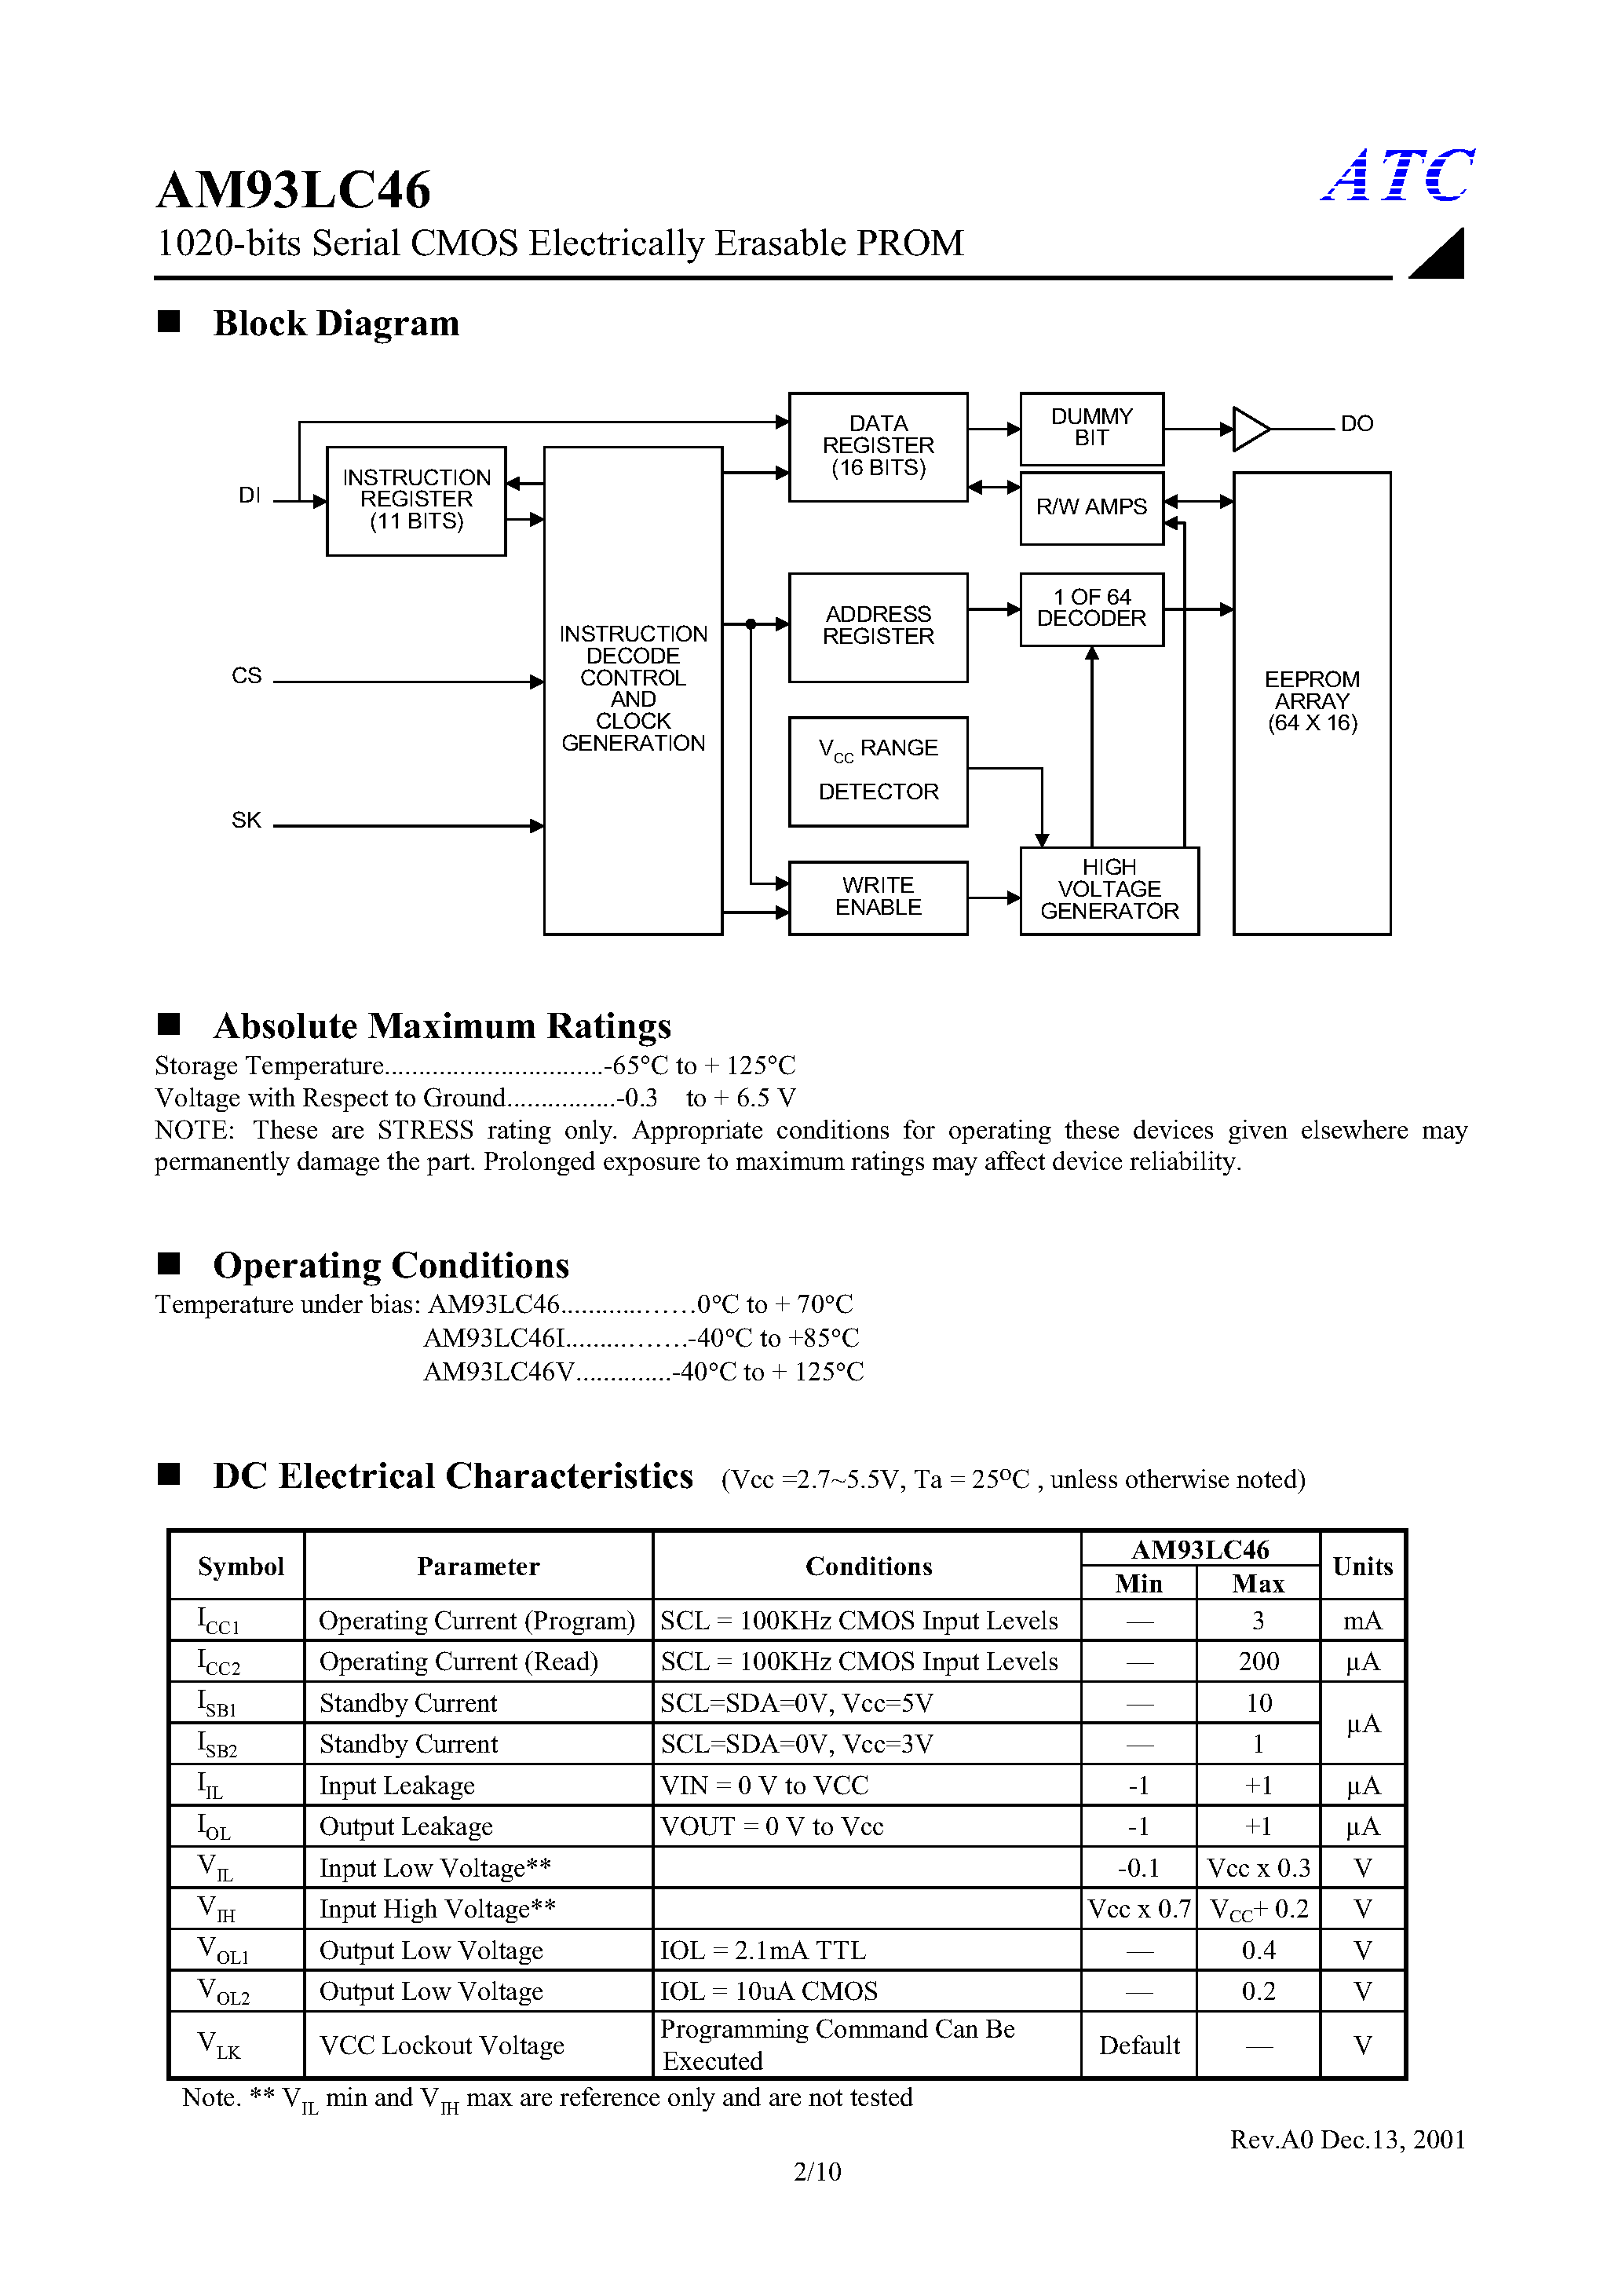 Datasheet AM93LC46S8 - 1024-bits Serial Electrically Erasable PROM page 2